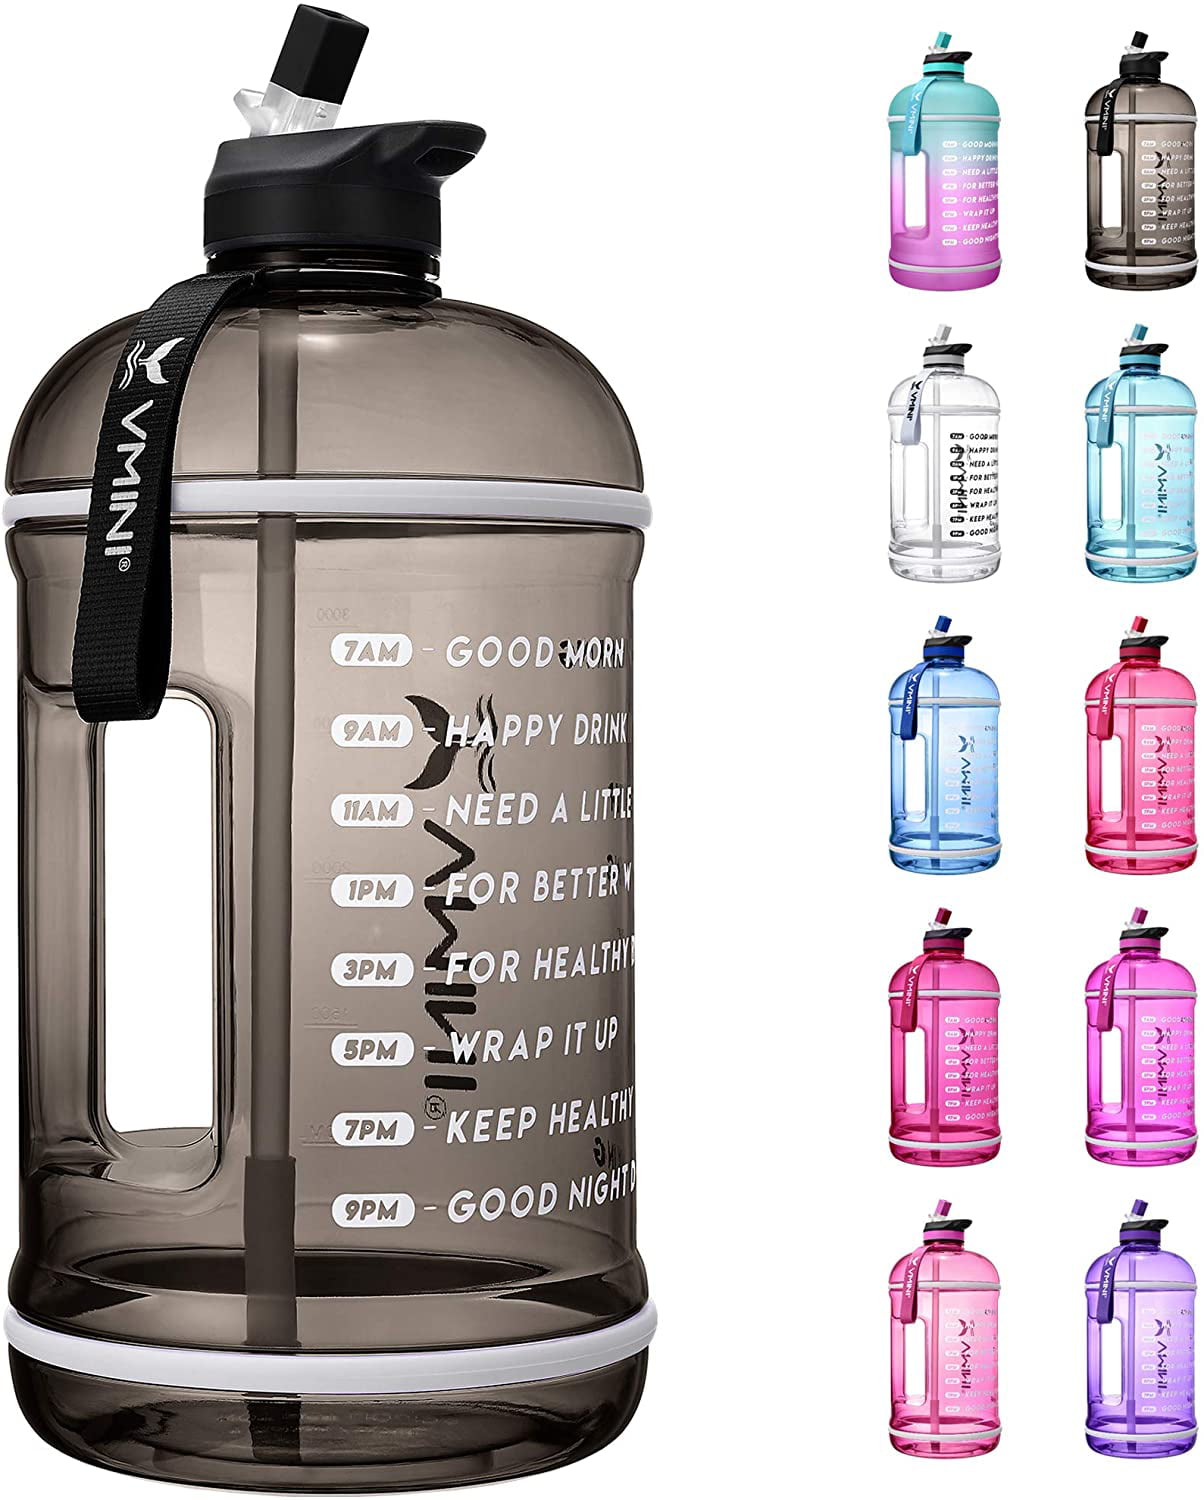 128-OZ DKM 1 Gallon Water Bottle Sports Water Bottle with Motivational Maker Reminder BPA Free and Leak Proof Sports Gallon Jug Water Bottle Pink 